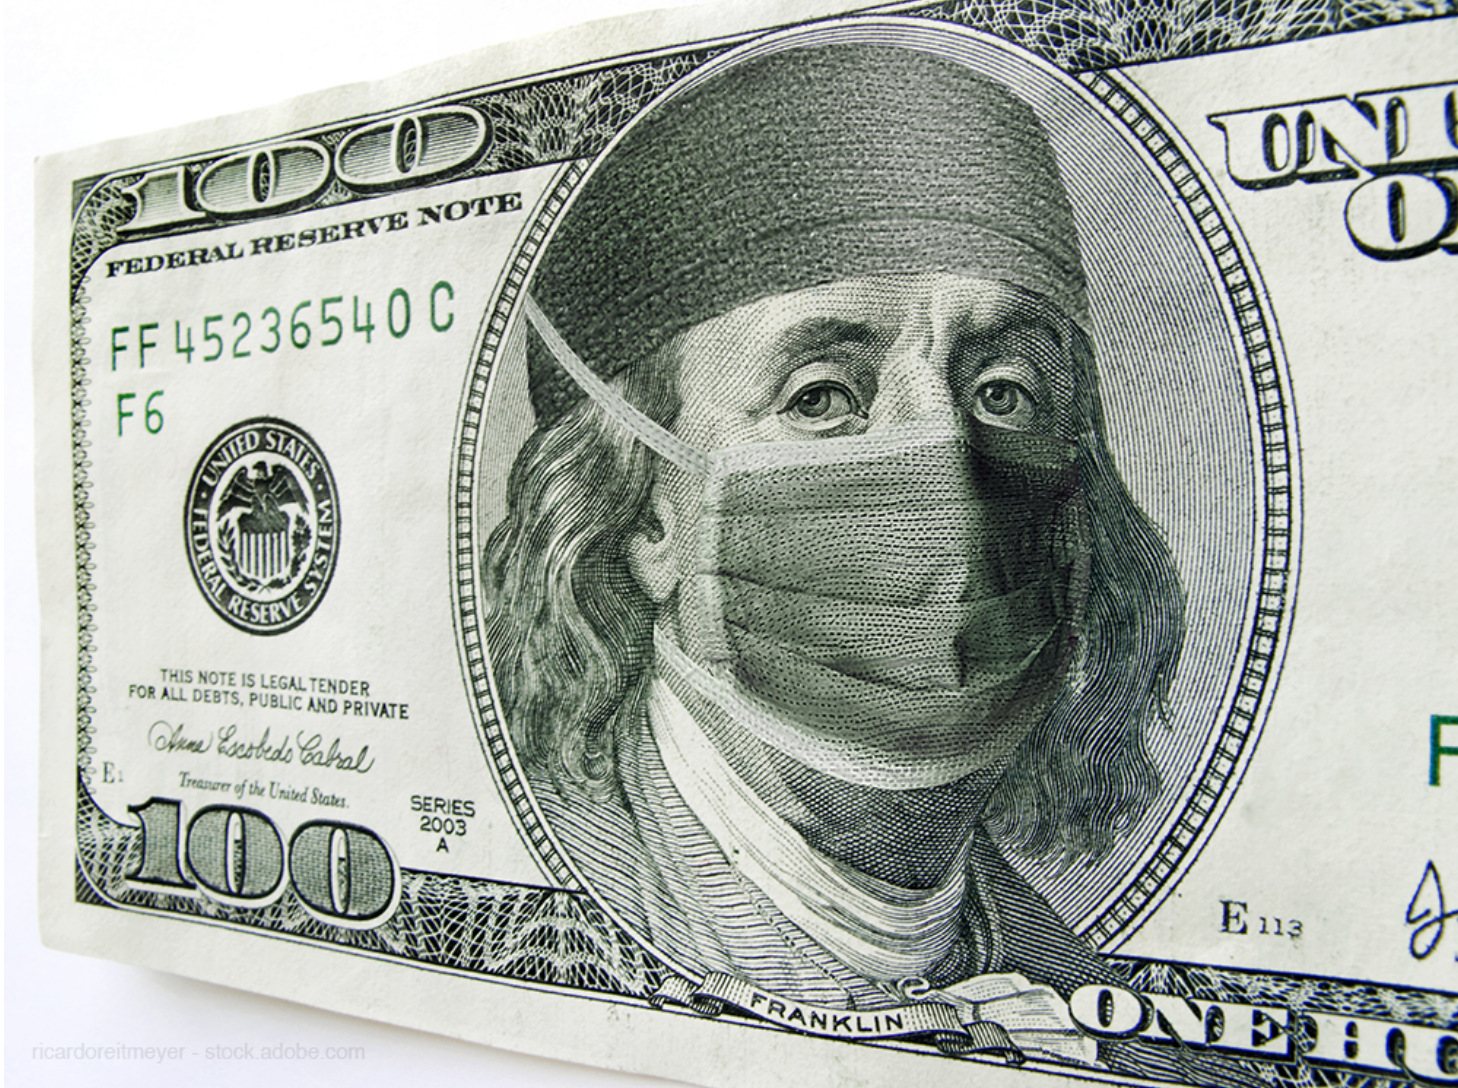 CMS approves physician fee schedule, including Medicare cuts to ophthalmology